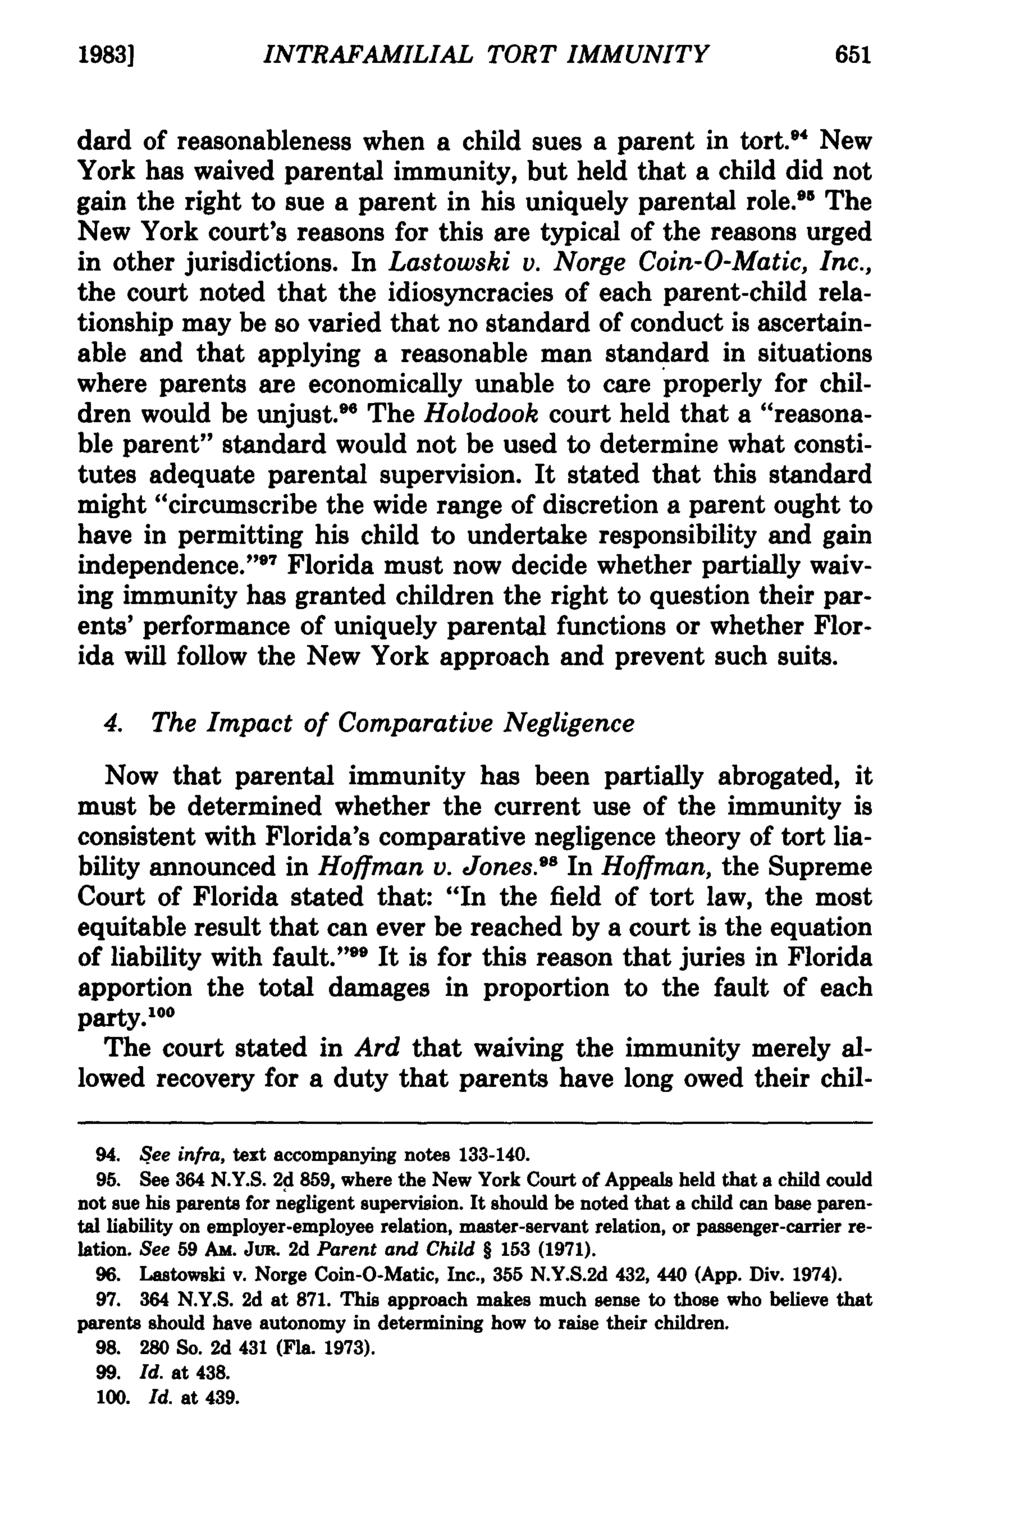 19831 INTRAFAMILIAL TORT IMMUNITY dard of reasonableness when a child sues a parent in tort.